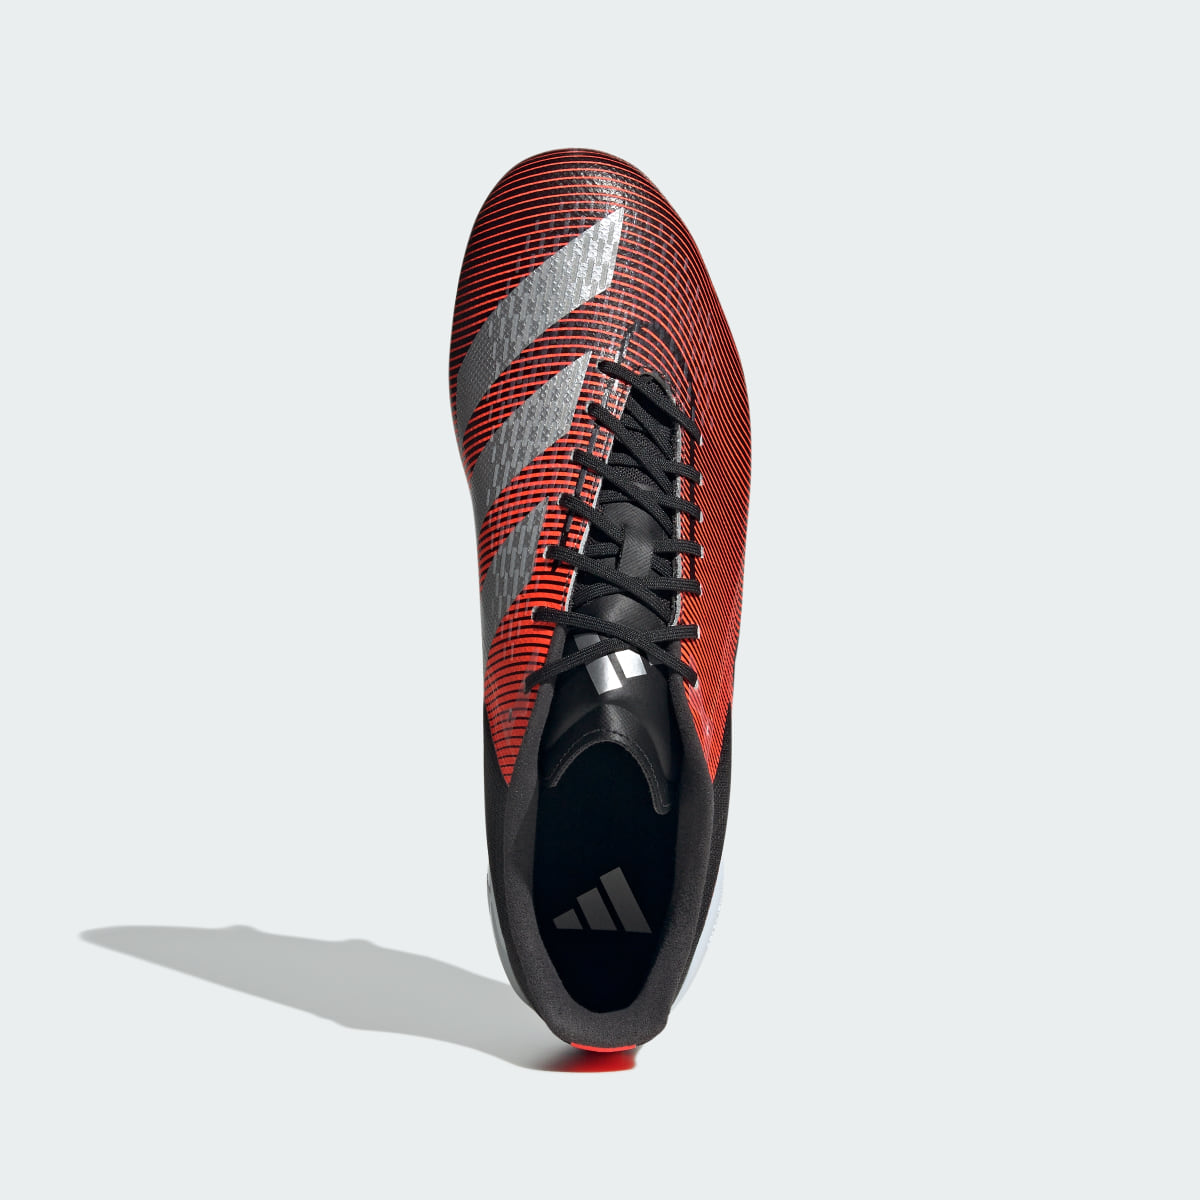 Adidas Adizero RS15 Pro Soft Ground Rugby Boots. 7